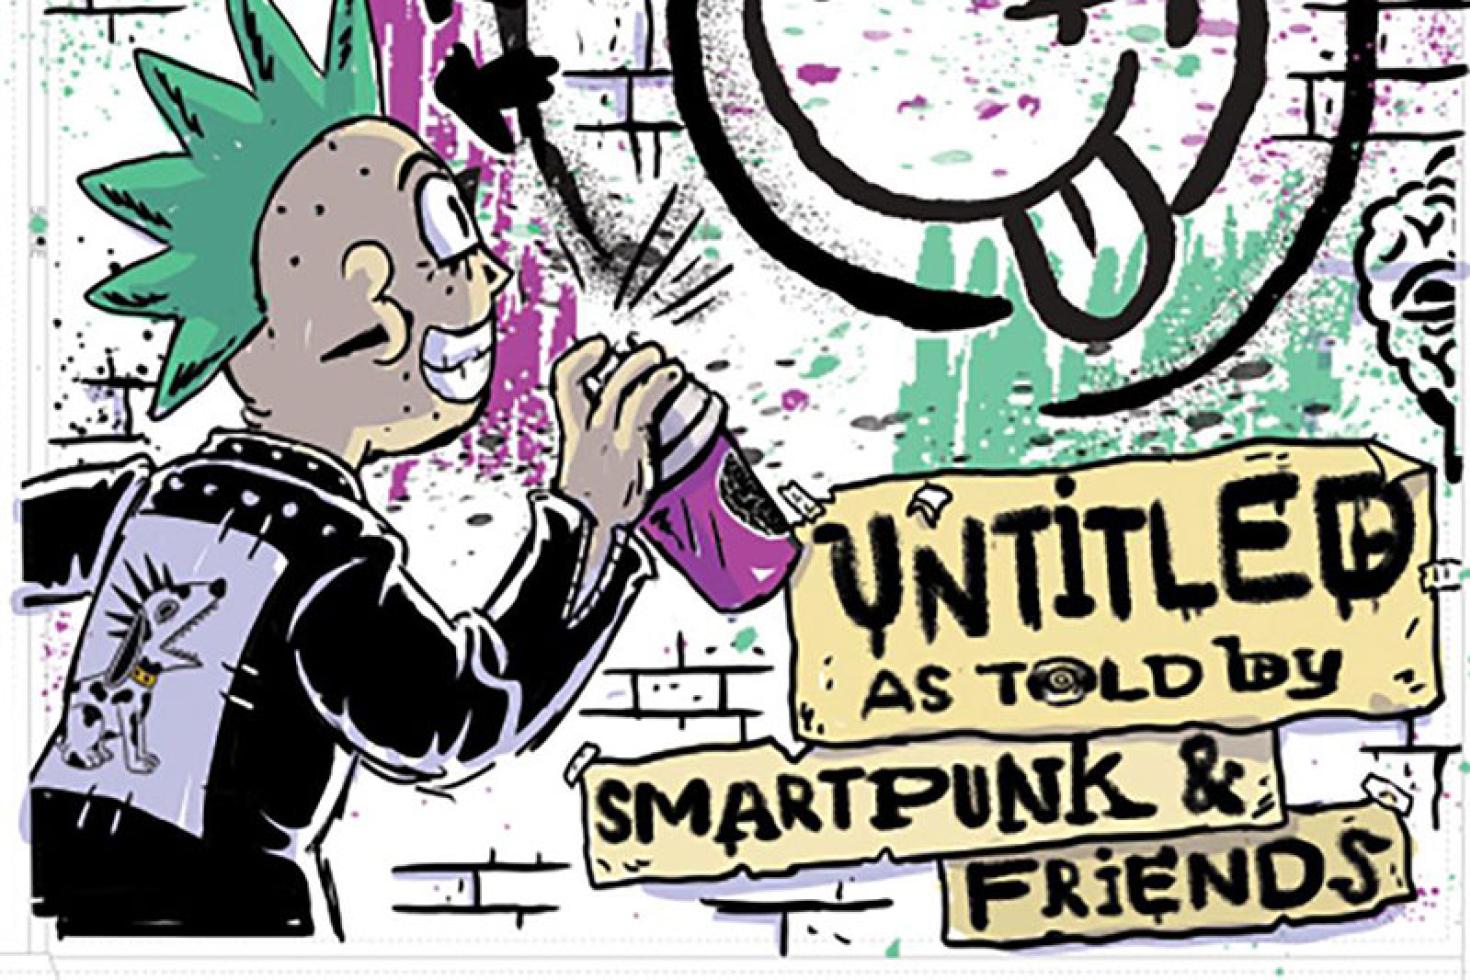 Smartpunk Records celebrates 20 years of Blink-182's Untitled album with tribute compilation